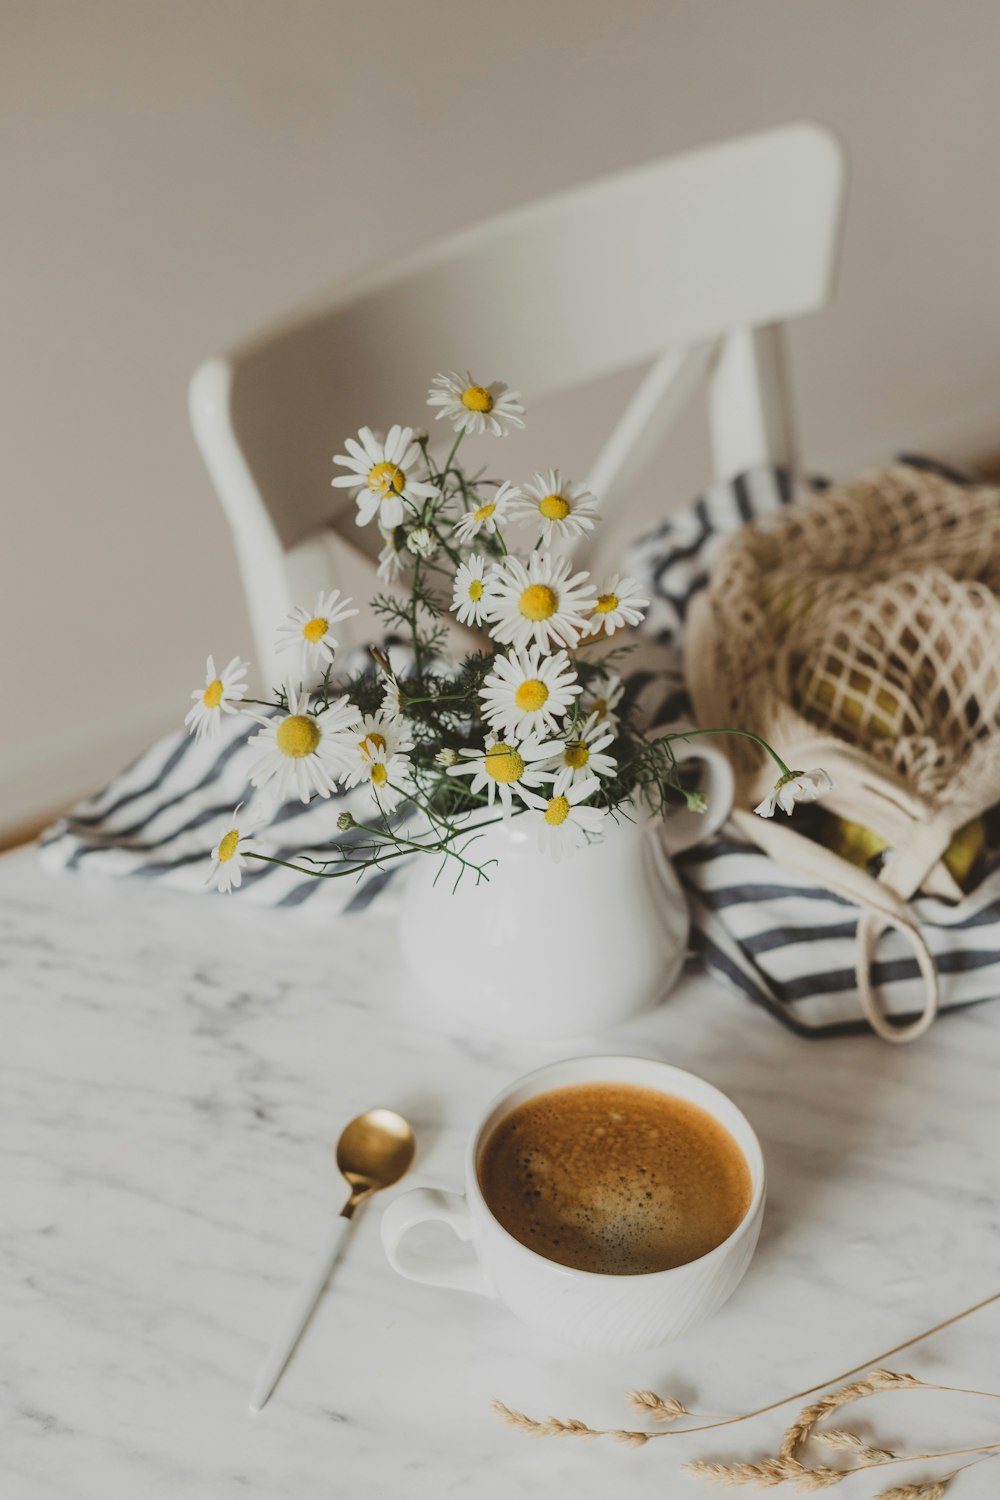 cappuccino near white and yellow flowers in vase on white table